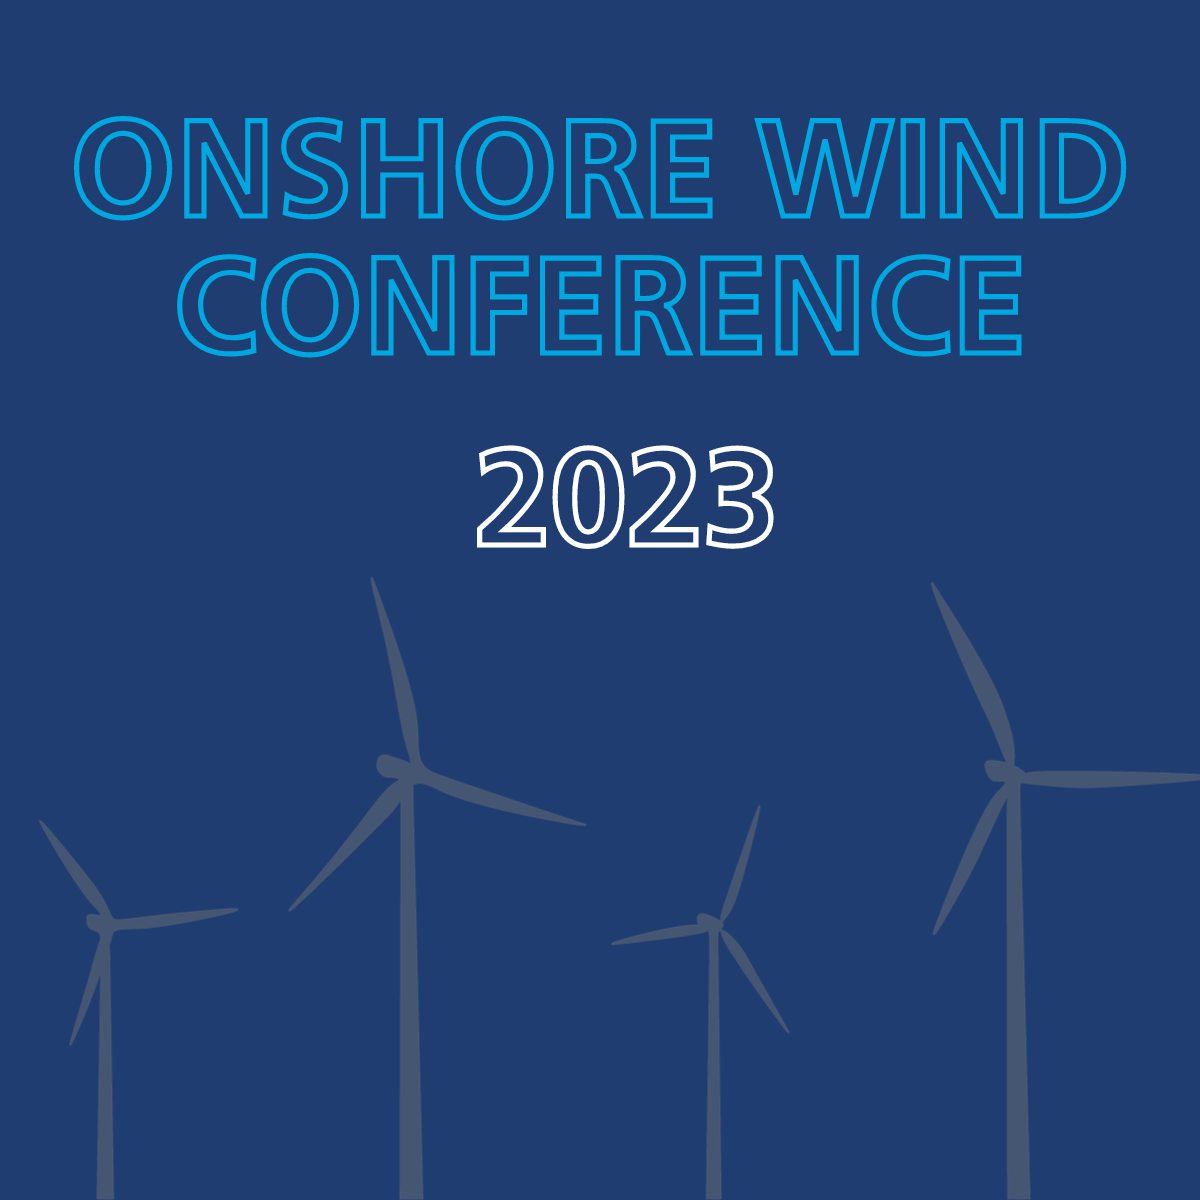 Eemits At the Onshore Wind Conference 2023